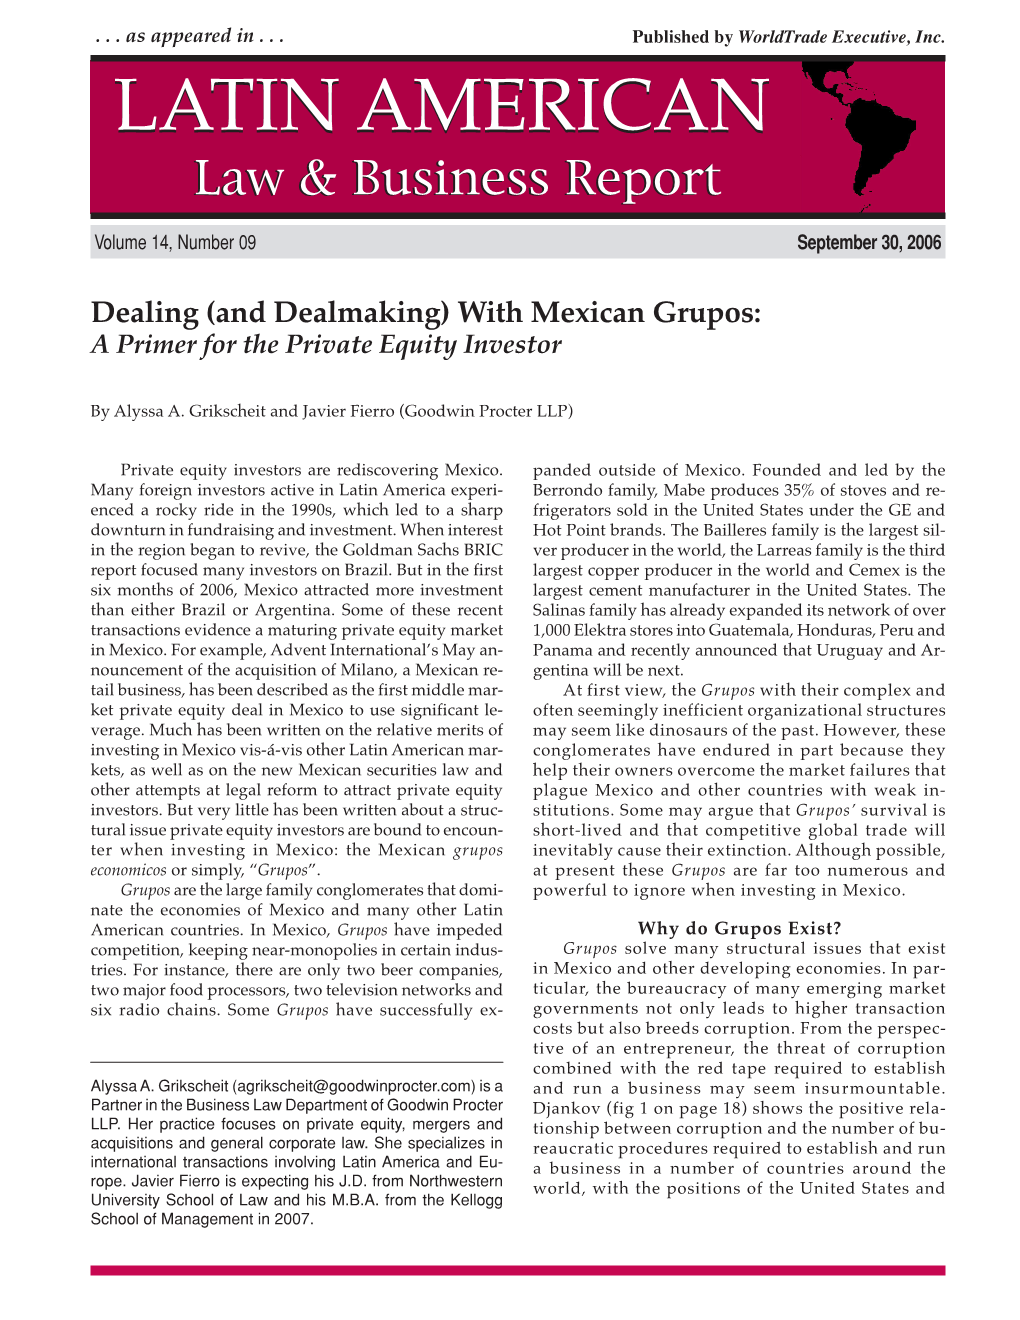 "Dealing (And Dealmaking) with Mexican Grupos: a Primer for The